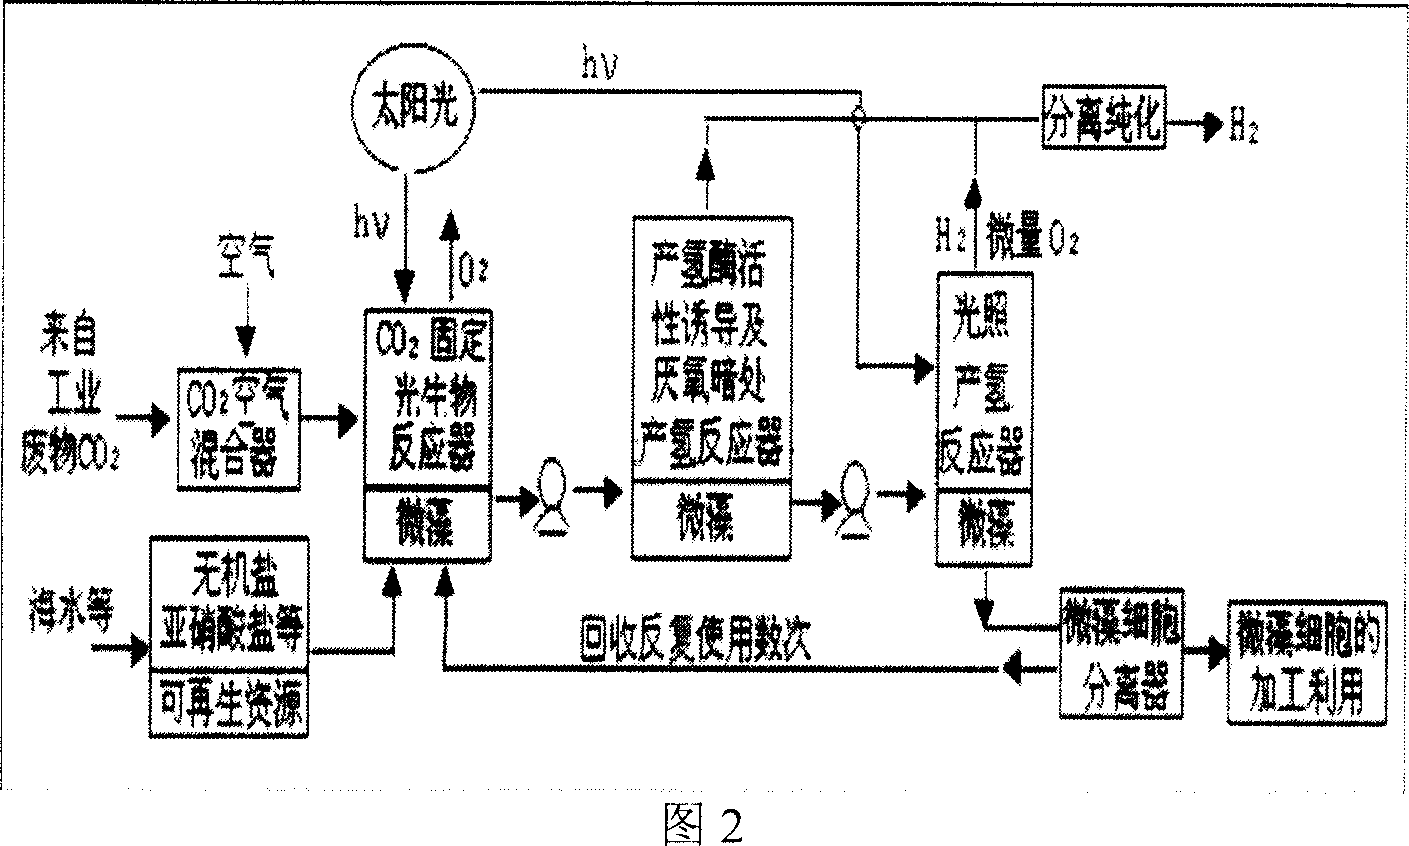 Method of photolyzing seawater by tetraselmis chui to produce hydrogen using fuel cell hydrogen consuming technique